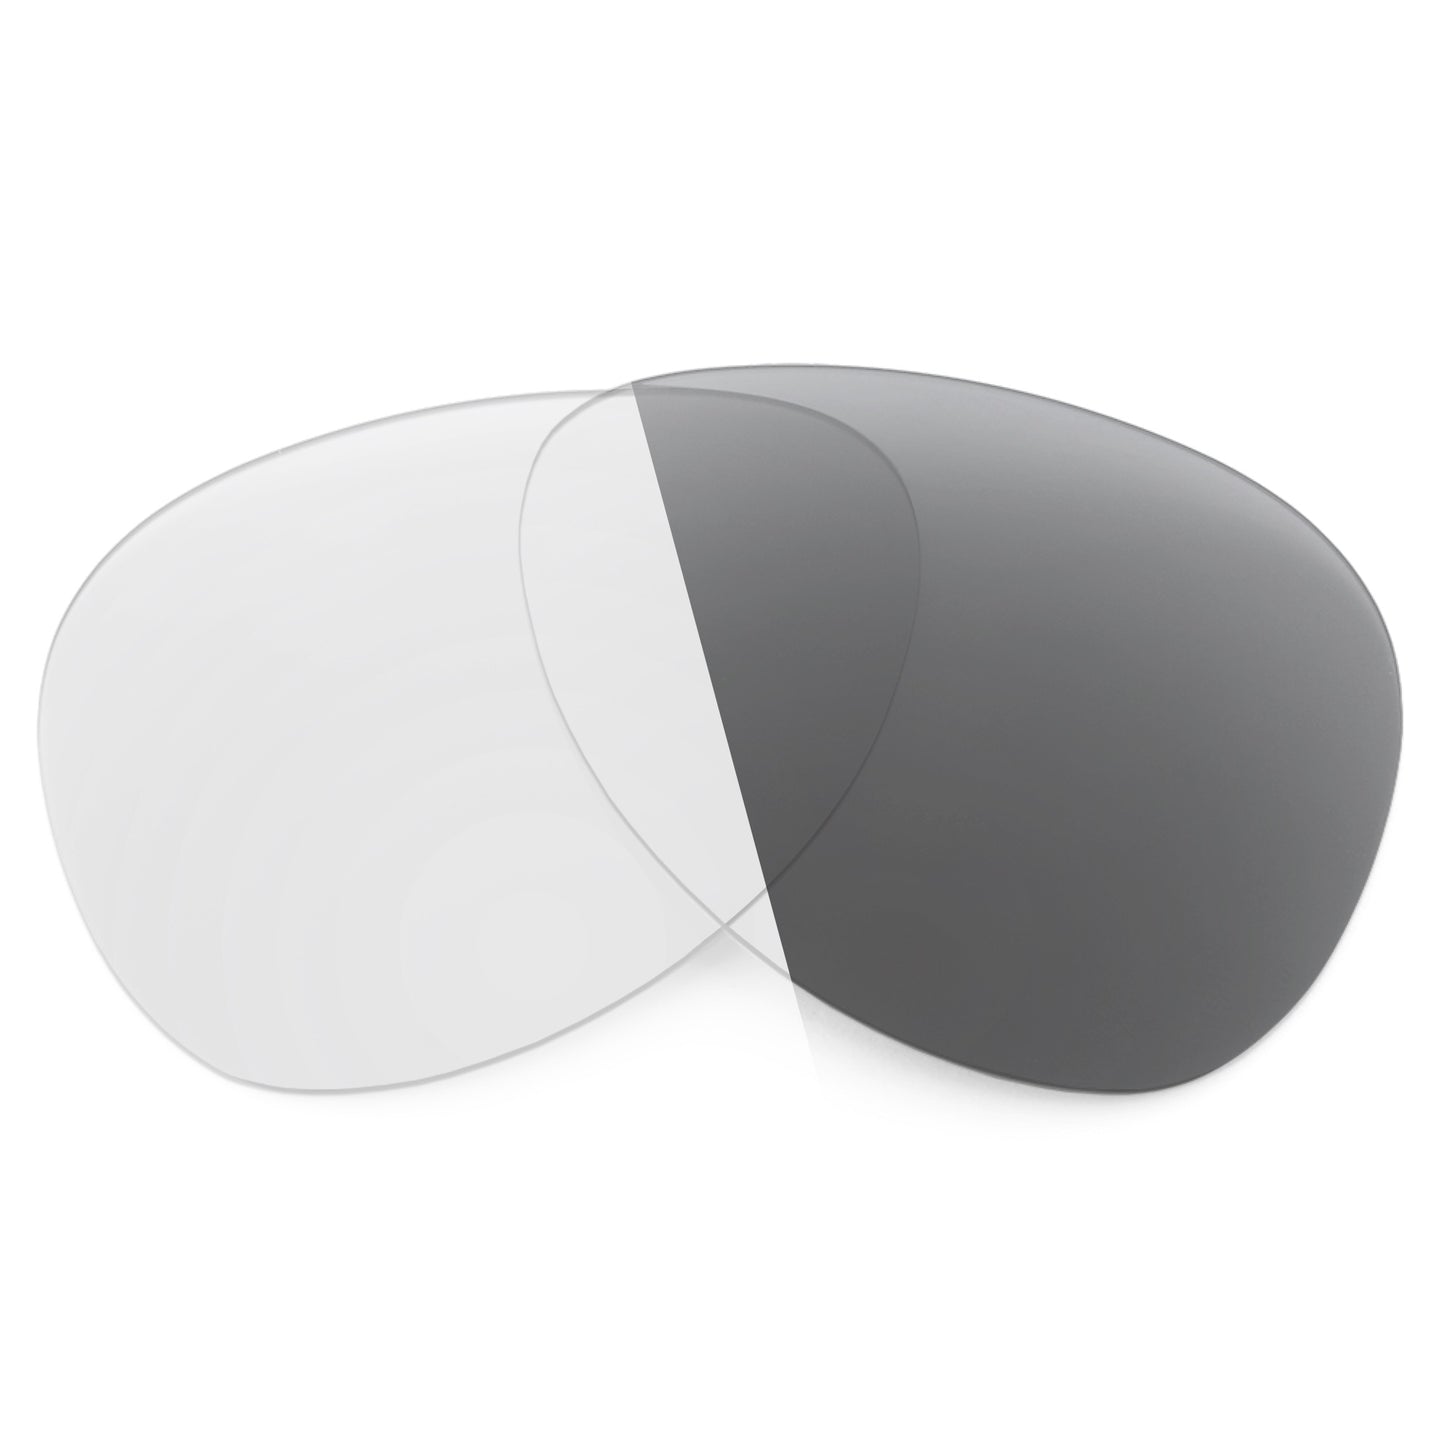 Revant replacement lenses for Ray-Ban RB3467 63mm Non-Polarized Adapt Gray Photochromic